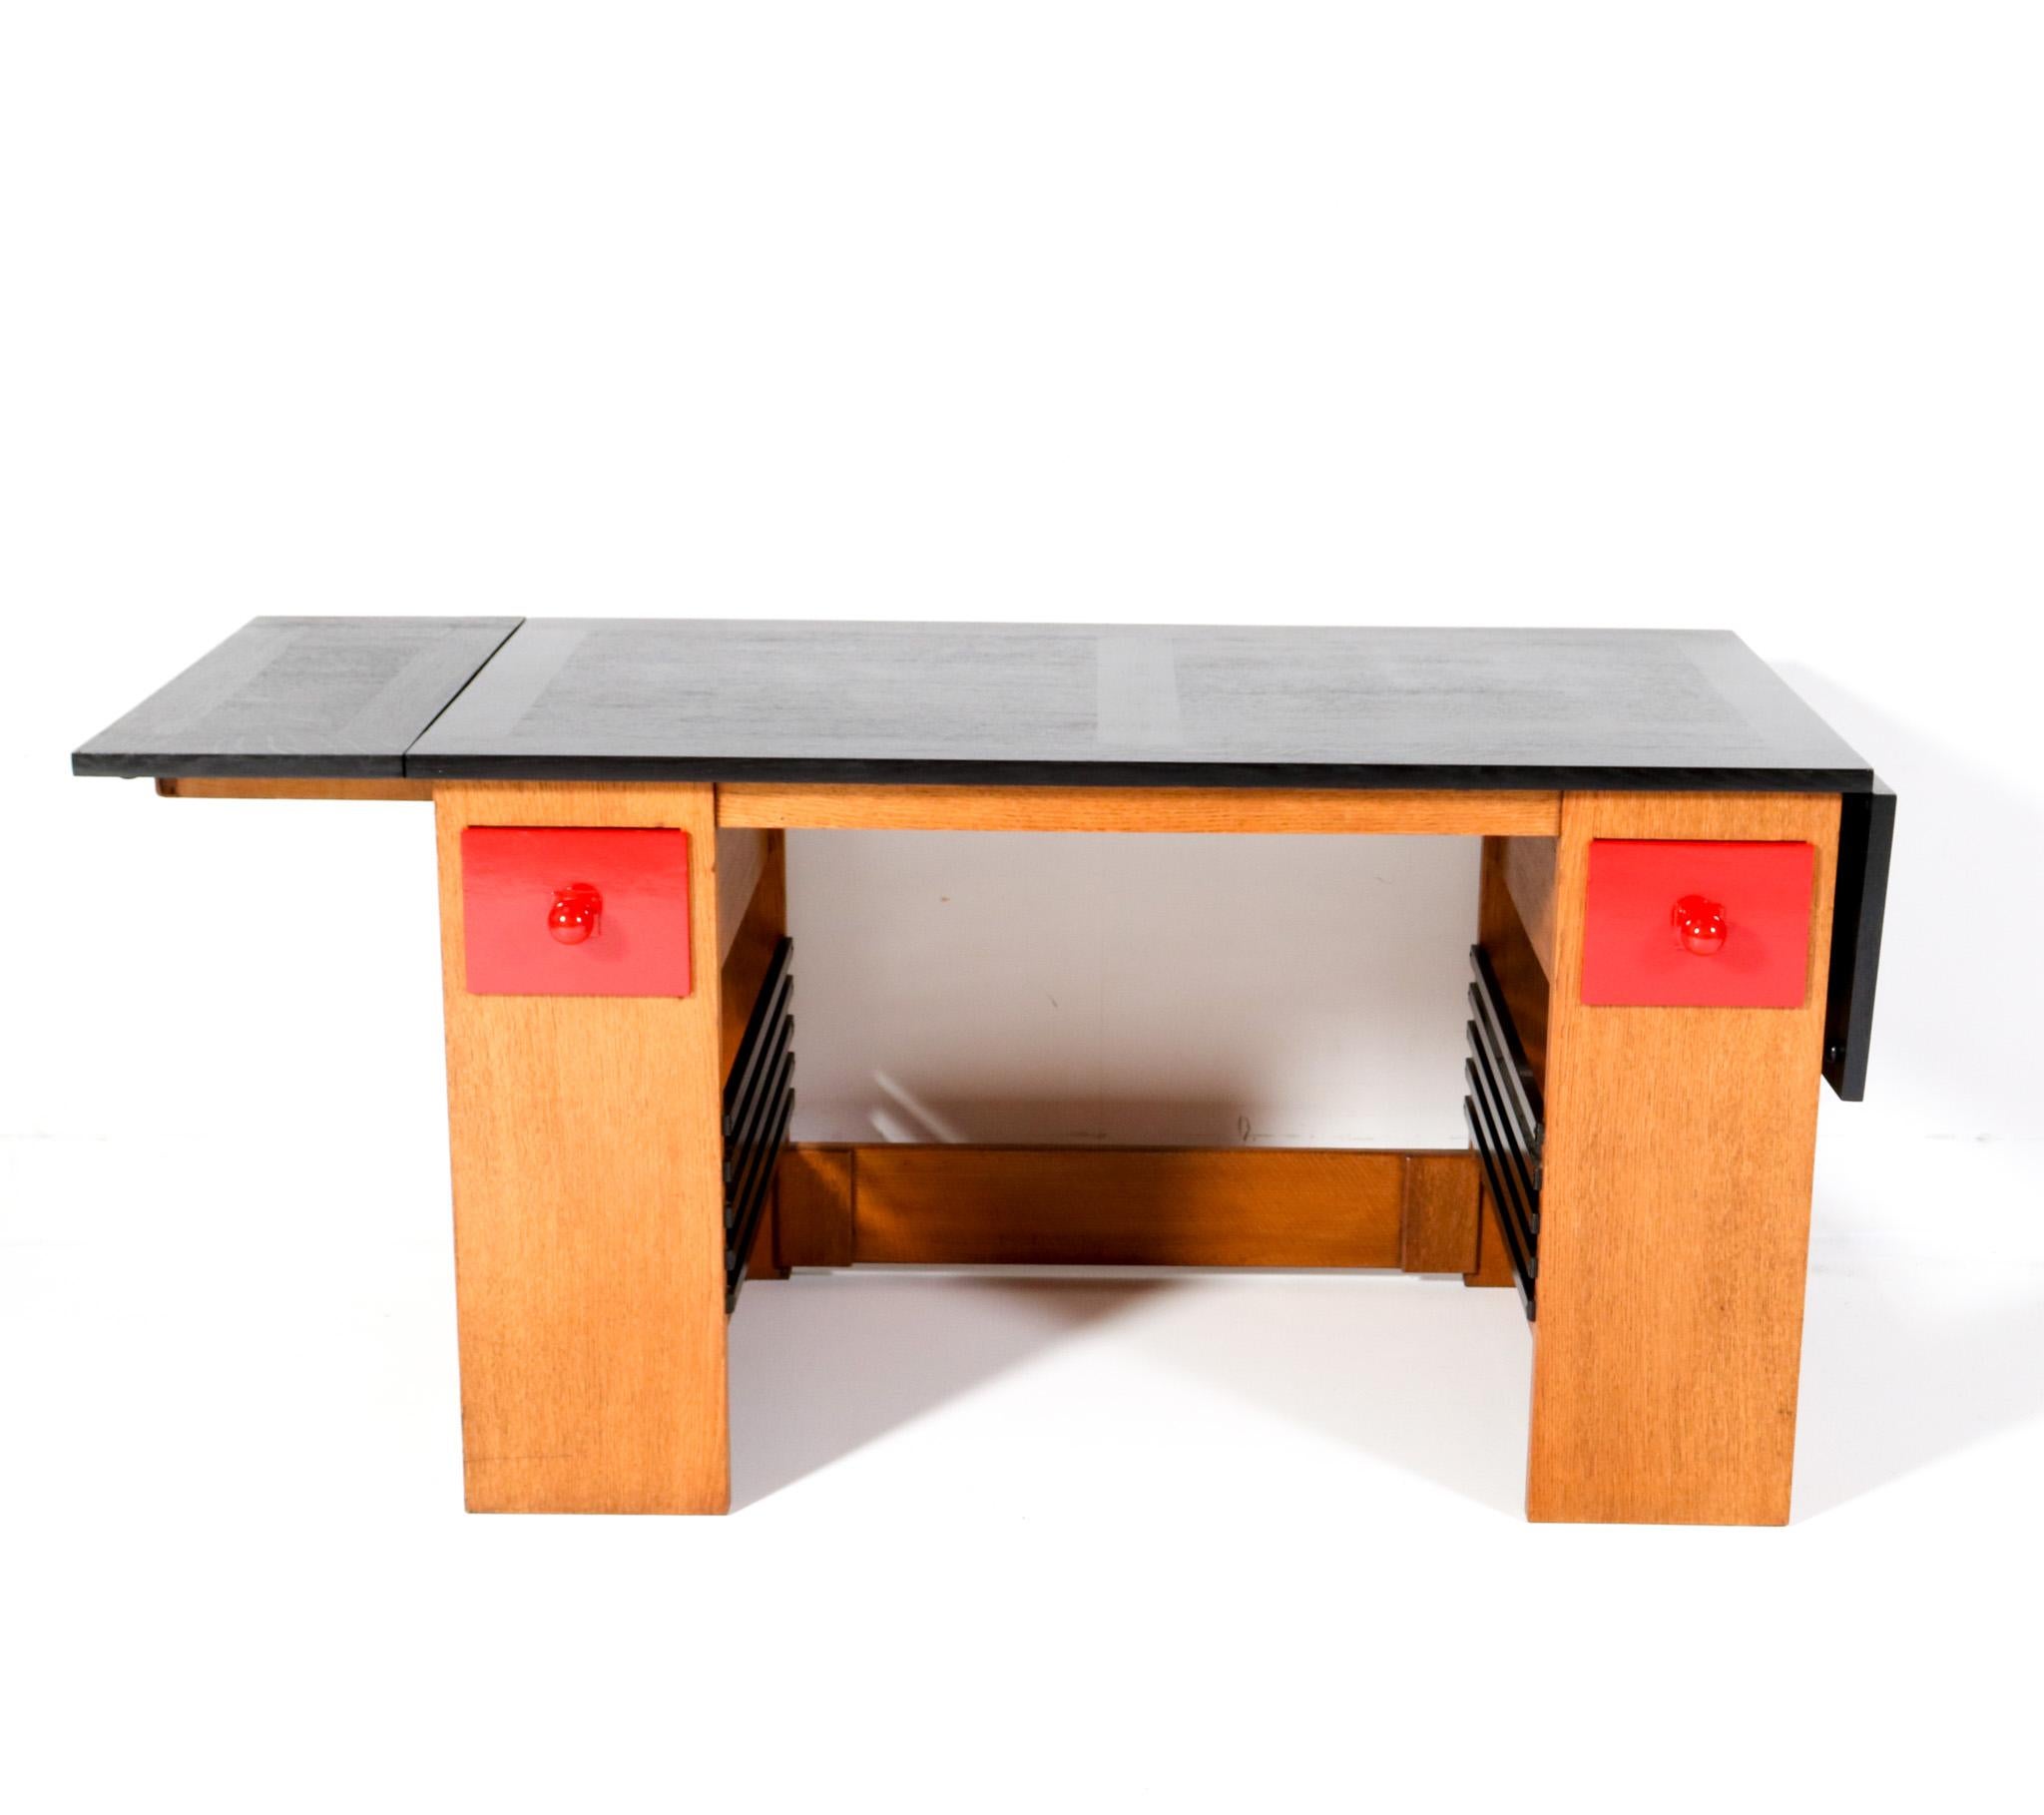 Early 20th Century  Art Deco Modernist Desk or Writing Table by Hendrik Wouda for Pander, 1920s For Sale